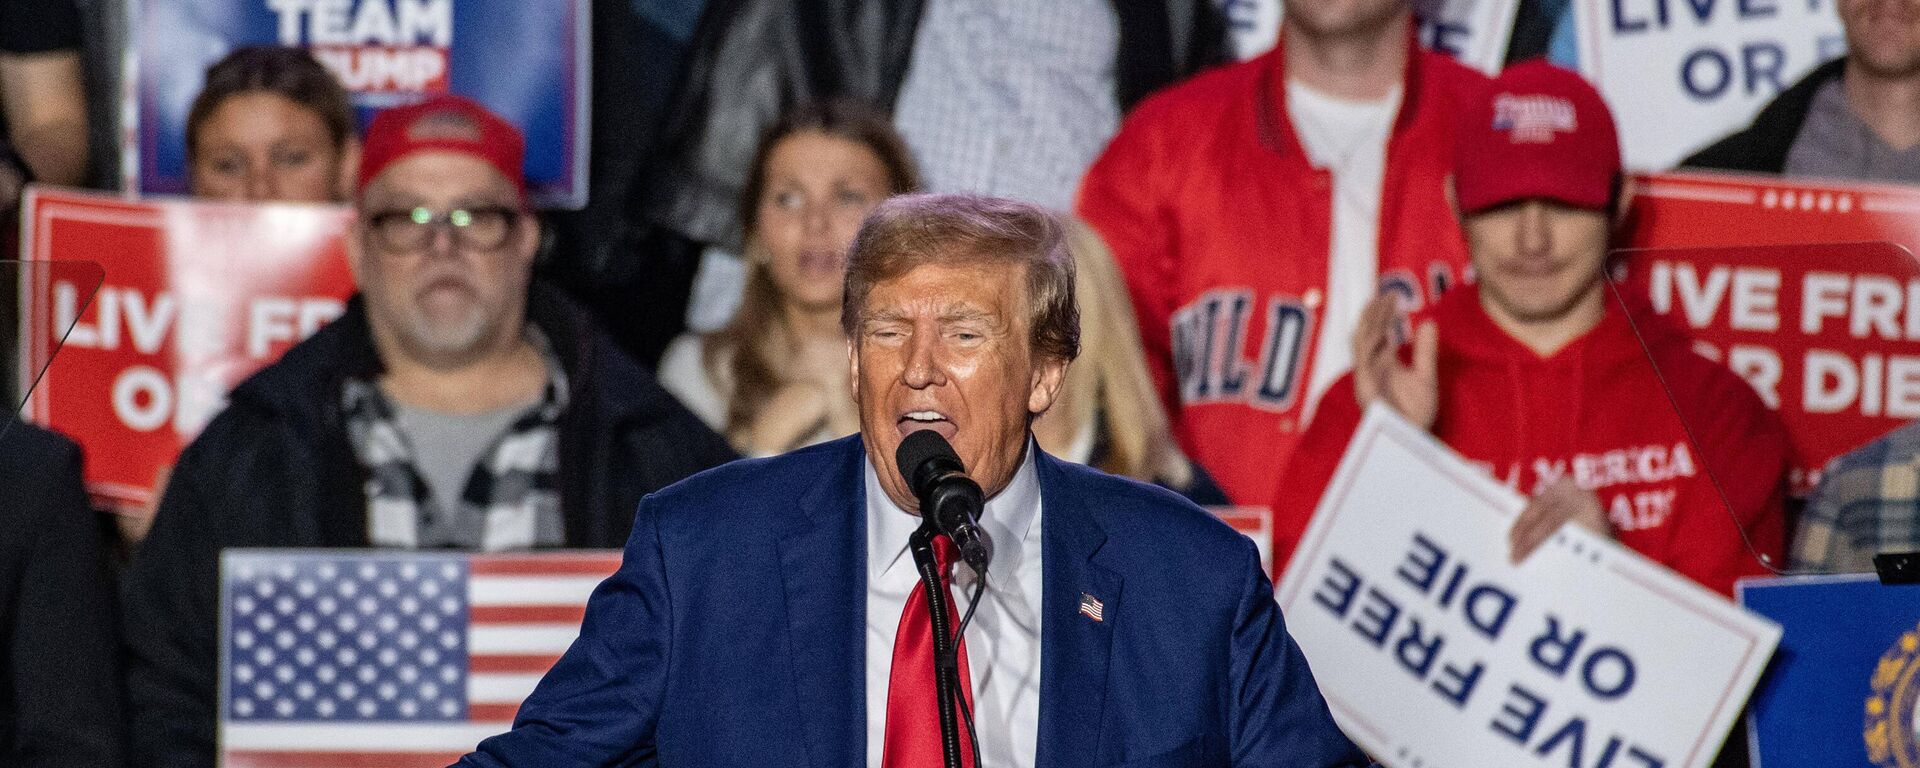 Former US President and 2024 Republican presidential hopeful Donald Trump speaks during a campaign rally at the University of New Hampshire's Whittemore Center Arena in Durham, New Hampshire, on December 16, 2023 - Sputnik International, 1920, 16.12.2023